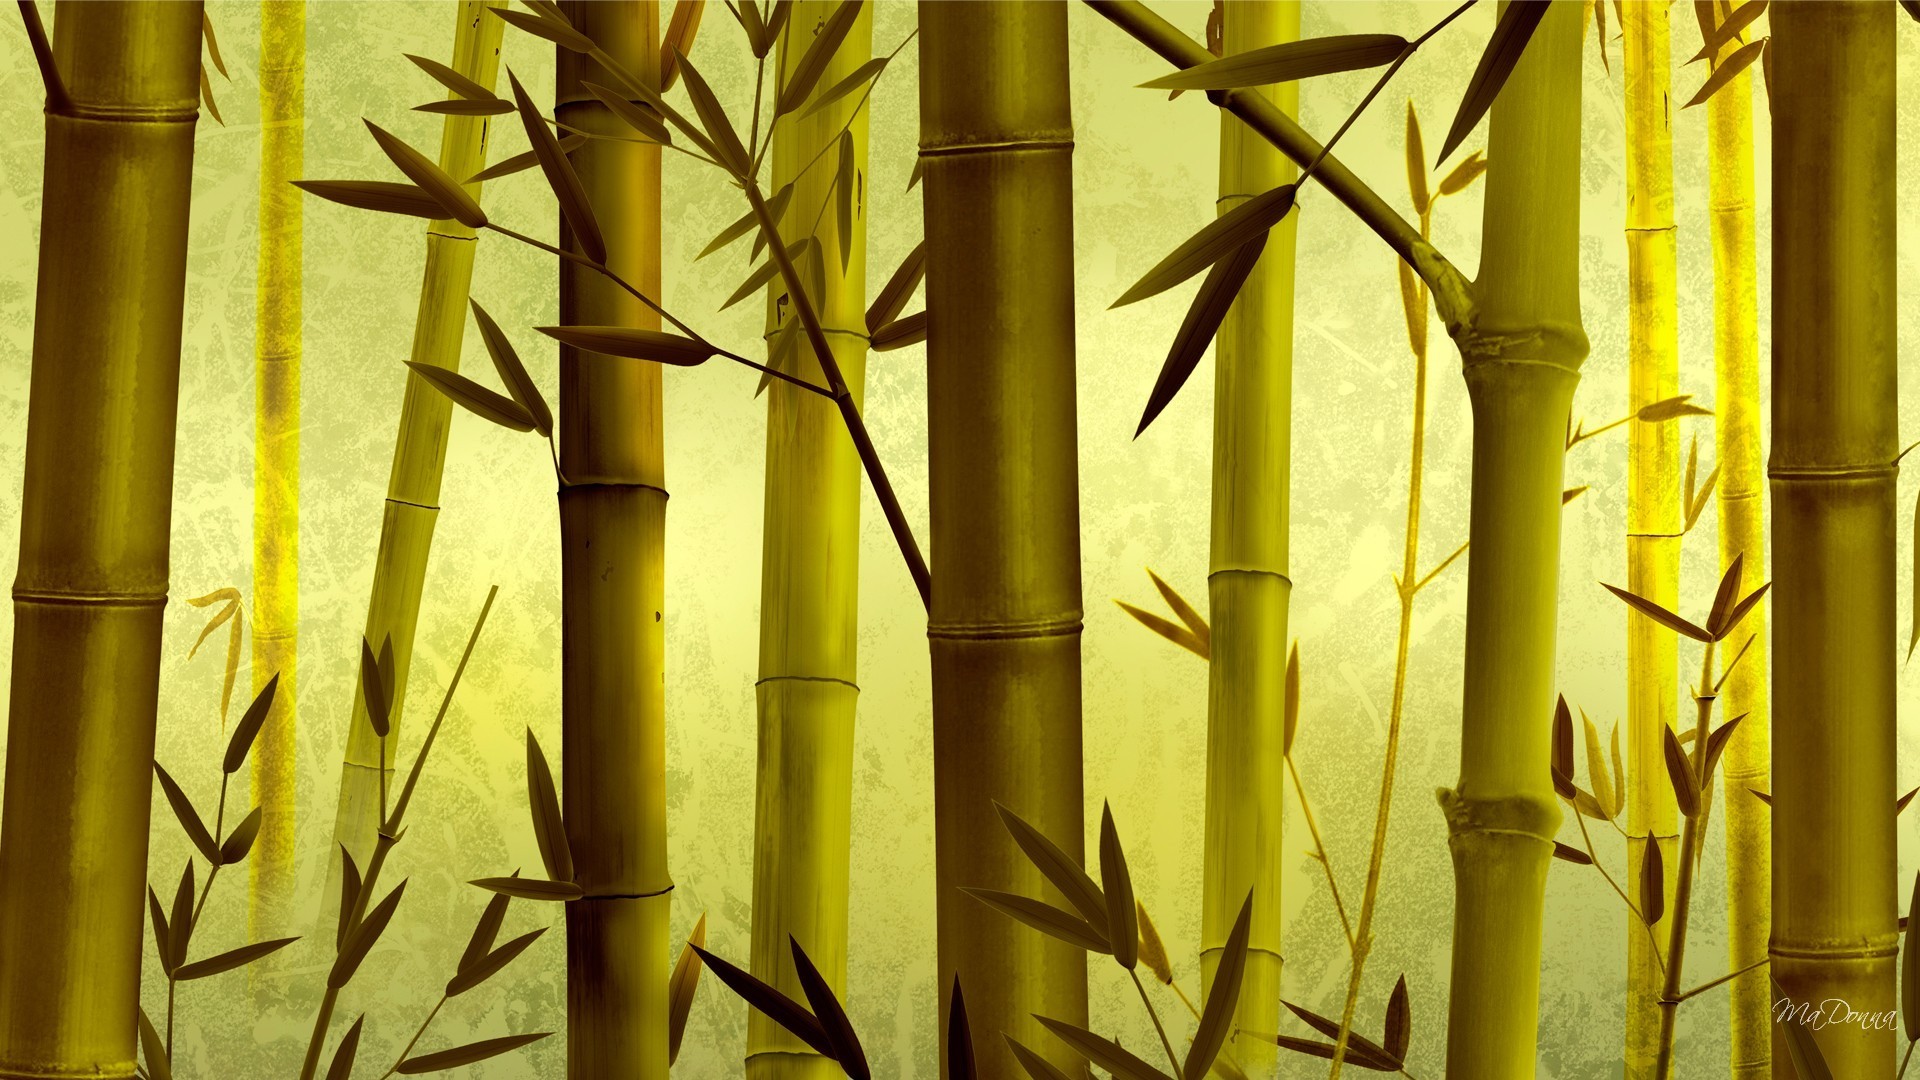 1920x1080 Bamboo Tag - Leaves Persona Bamboon Oriental Gold Trees Bamboo Firefox  Green Tropical Forests Wallpapers for